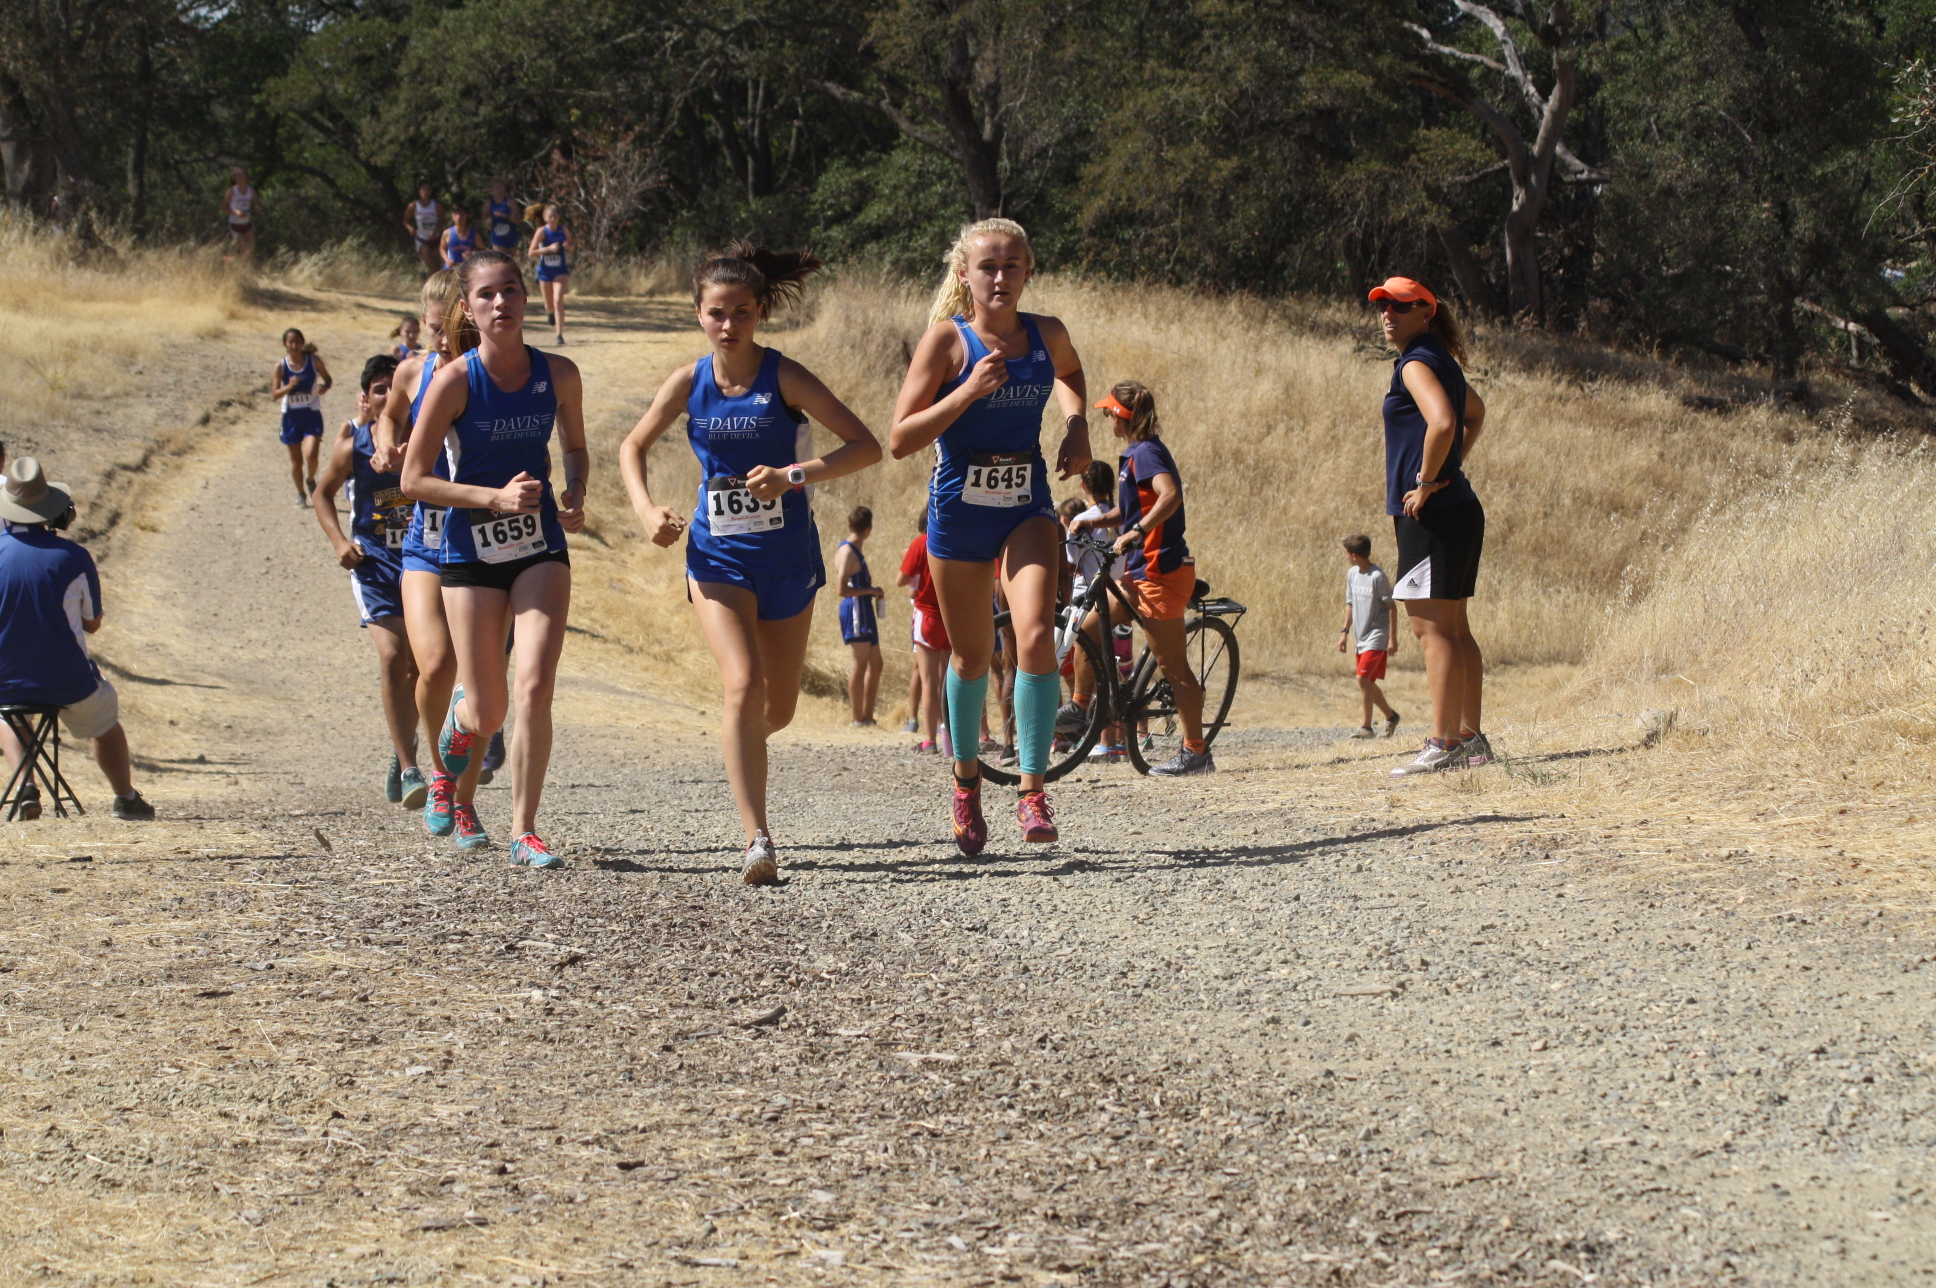 Davis's JV women lead the pack during the race.